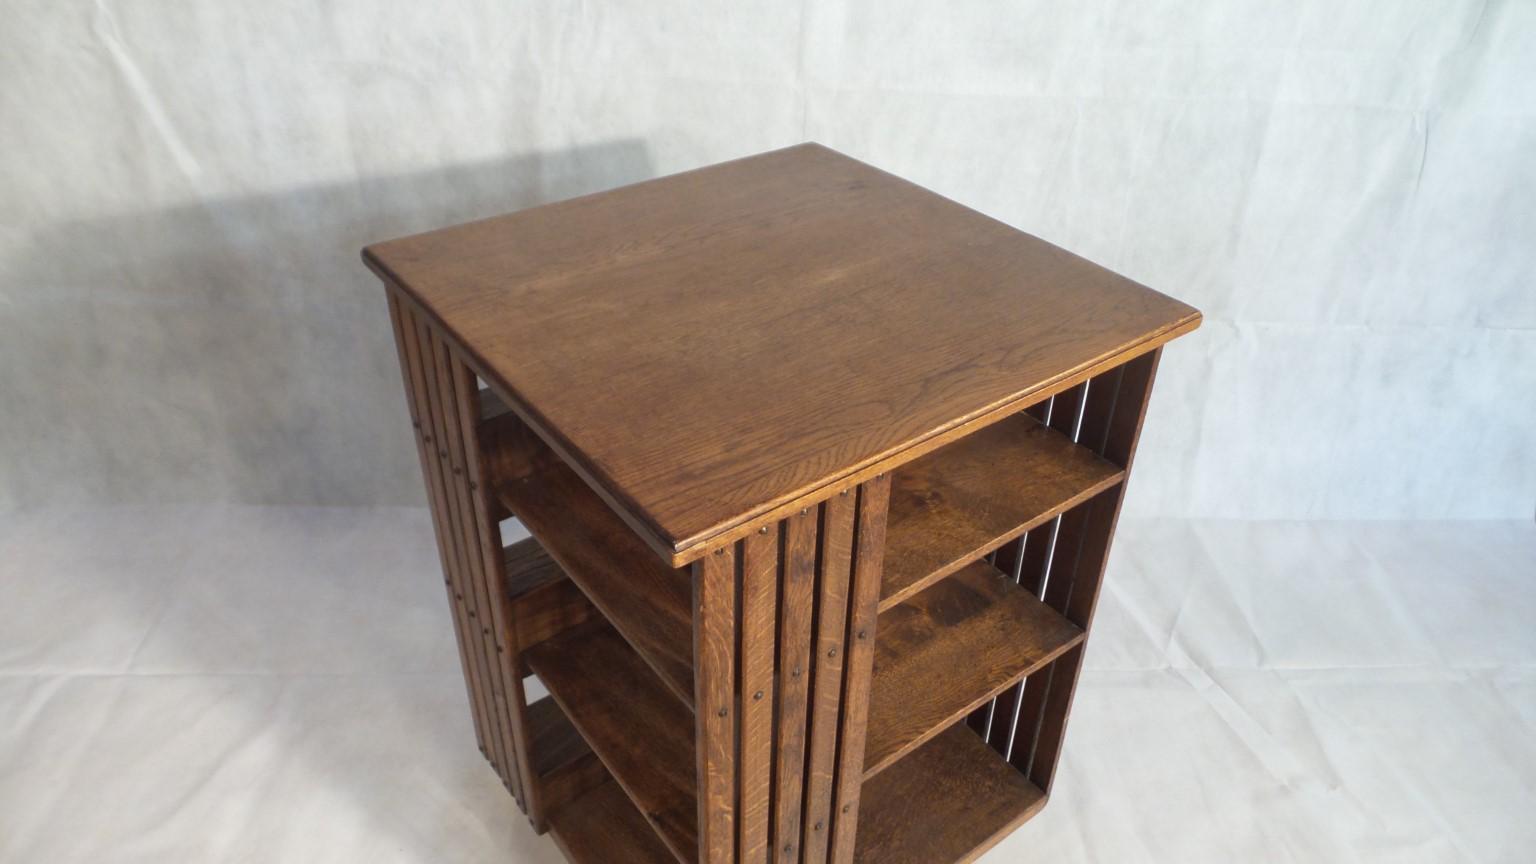 This really is a wonderful oak bookcase from the Art & crafts period of design. With its stylish and simple lines it embraces the very ethos of the Arts & Crafts movement. 

This was welcomed as simple design, beautiful materials and honest,